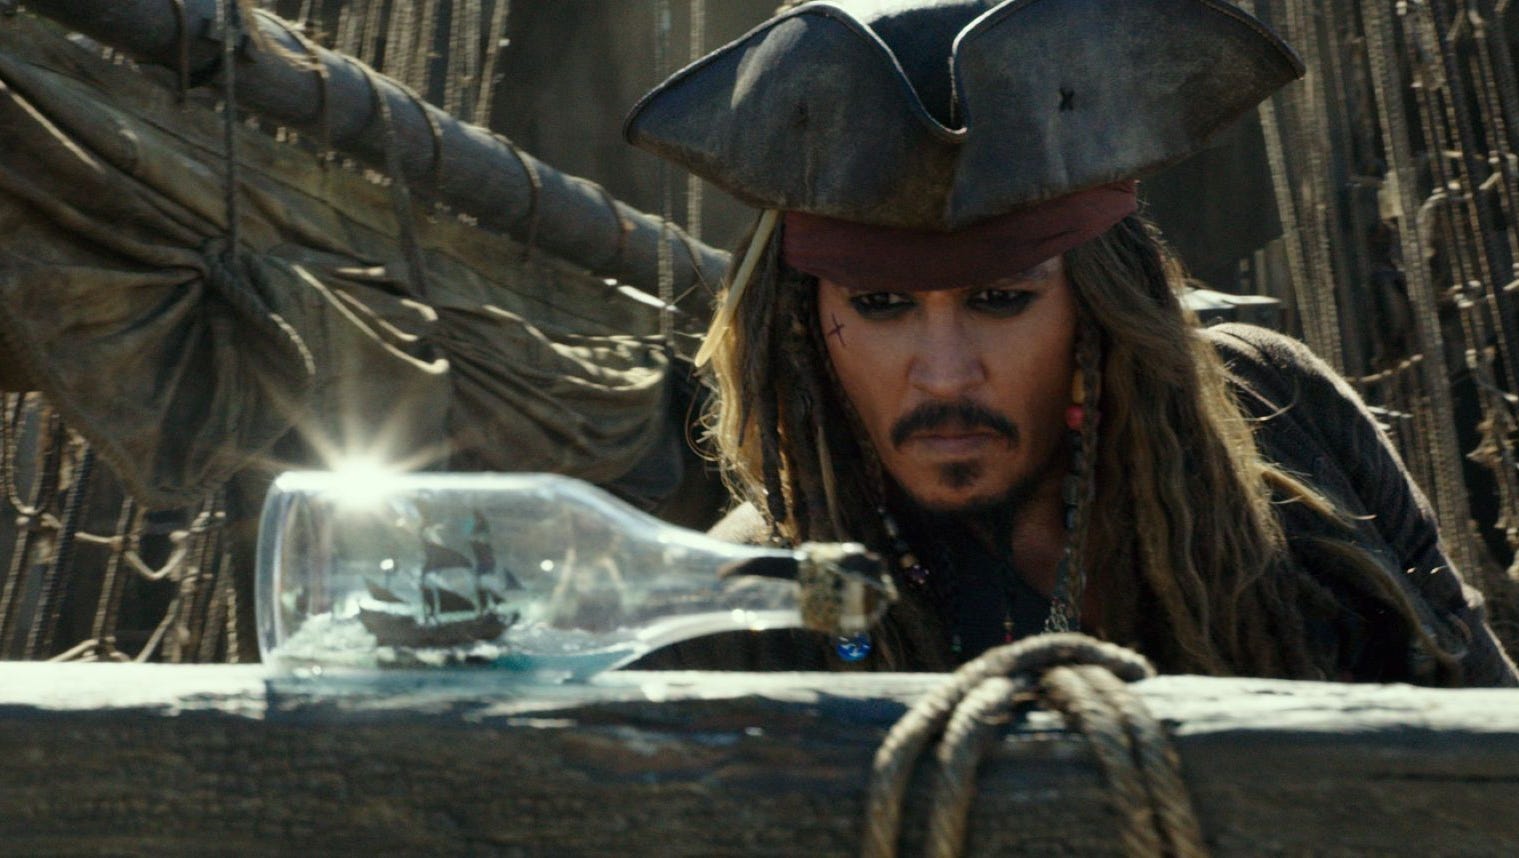 Box office: 'Pirates of the Caribbean' takes No. 1, 'Baywatch' sinks